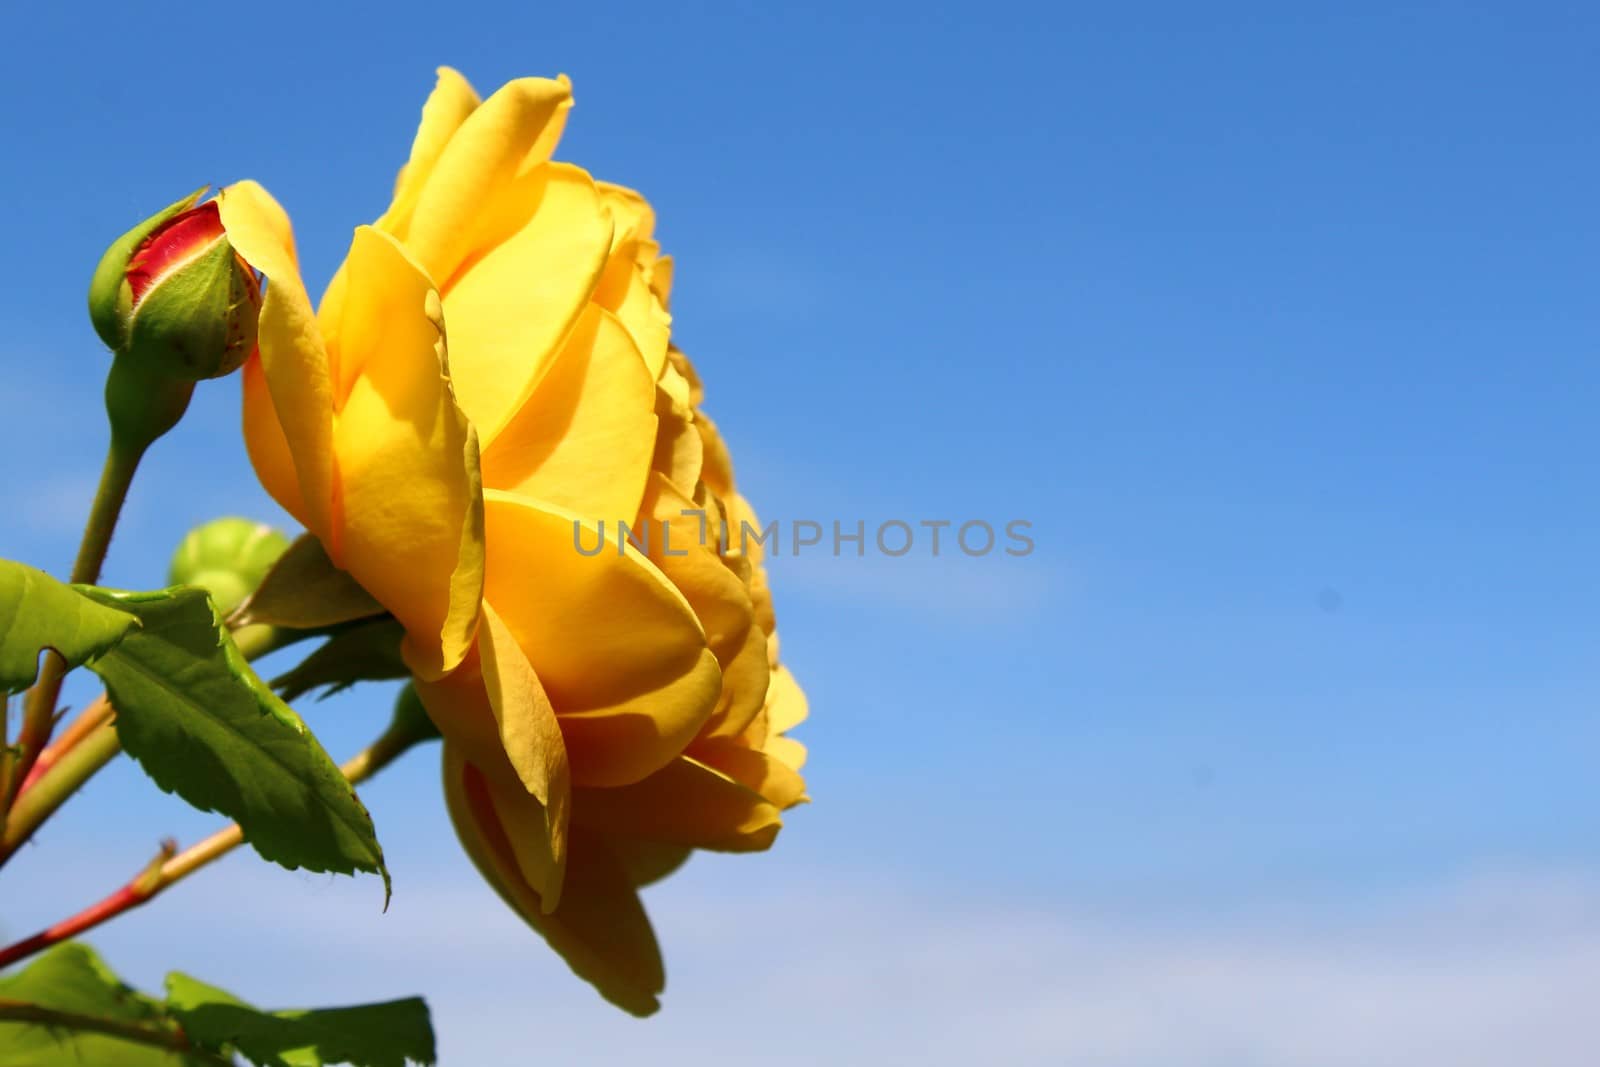 The picture shows yellow rose in front of blue sky.